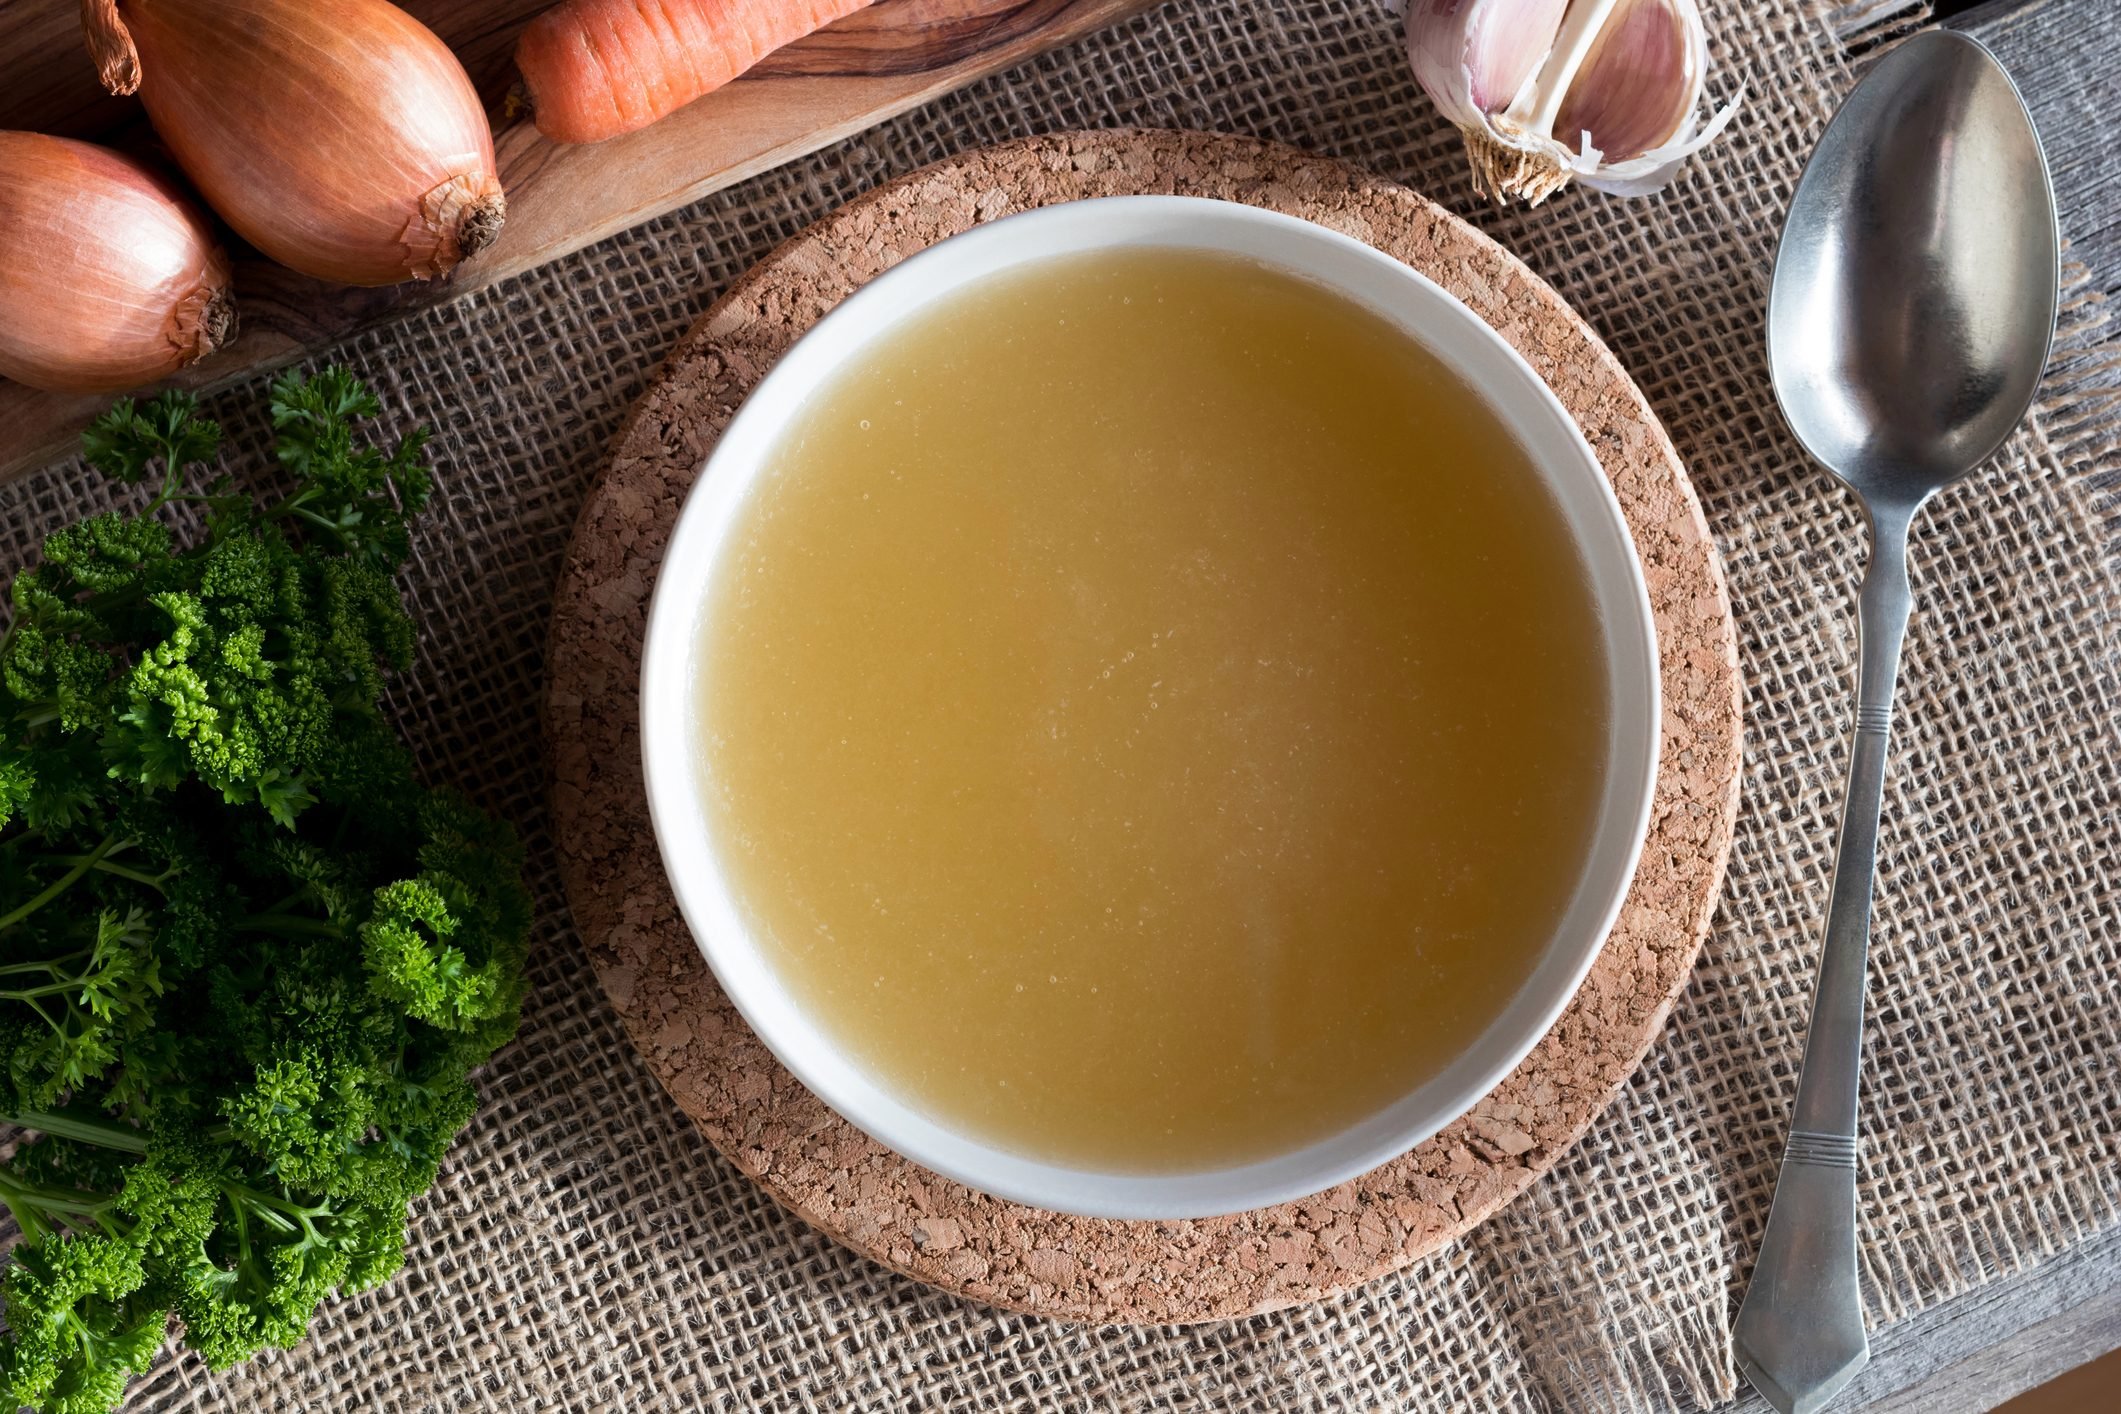 Can You Drink Bone Broth While Fasting?